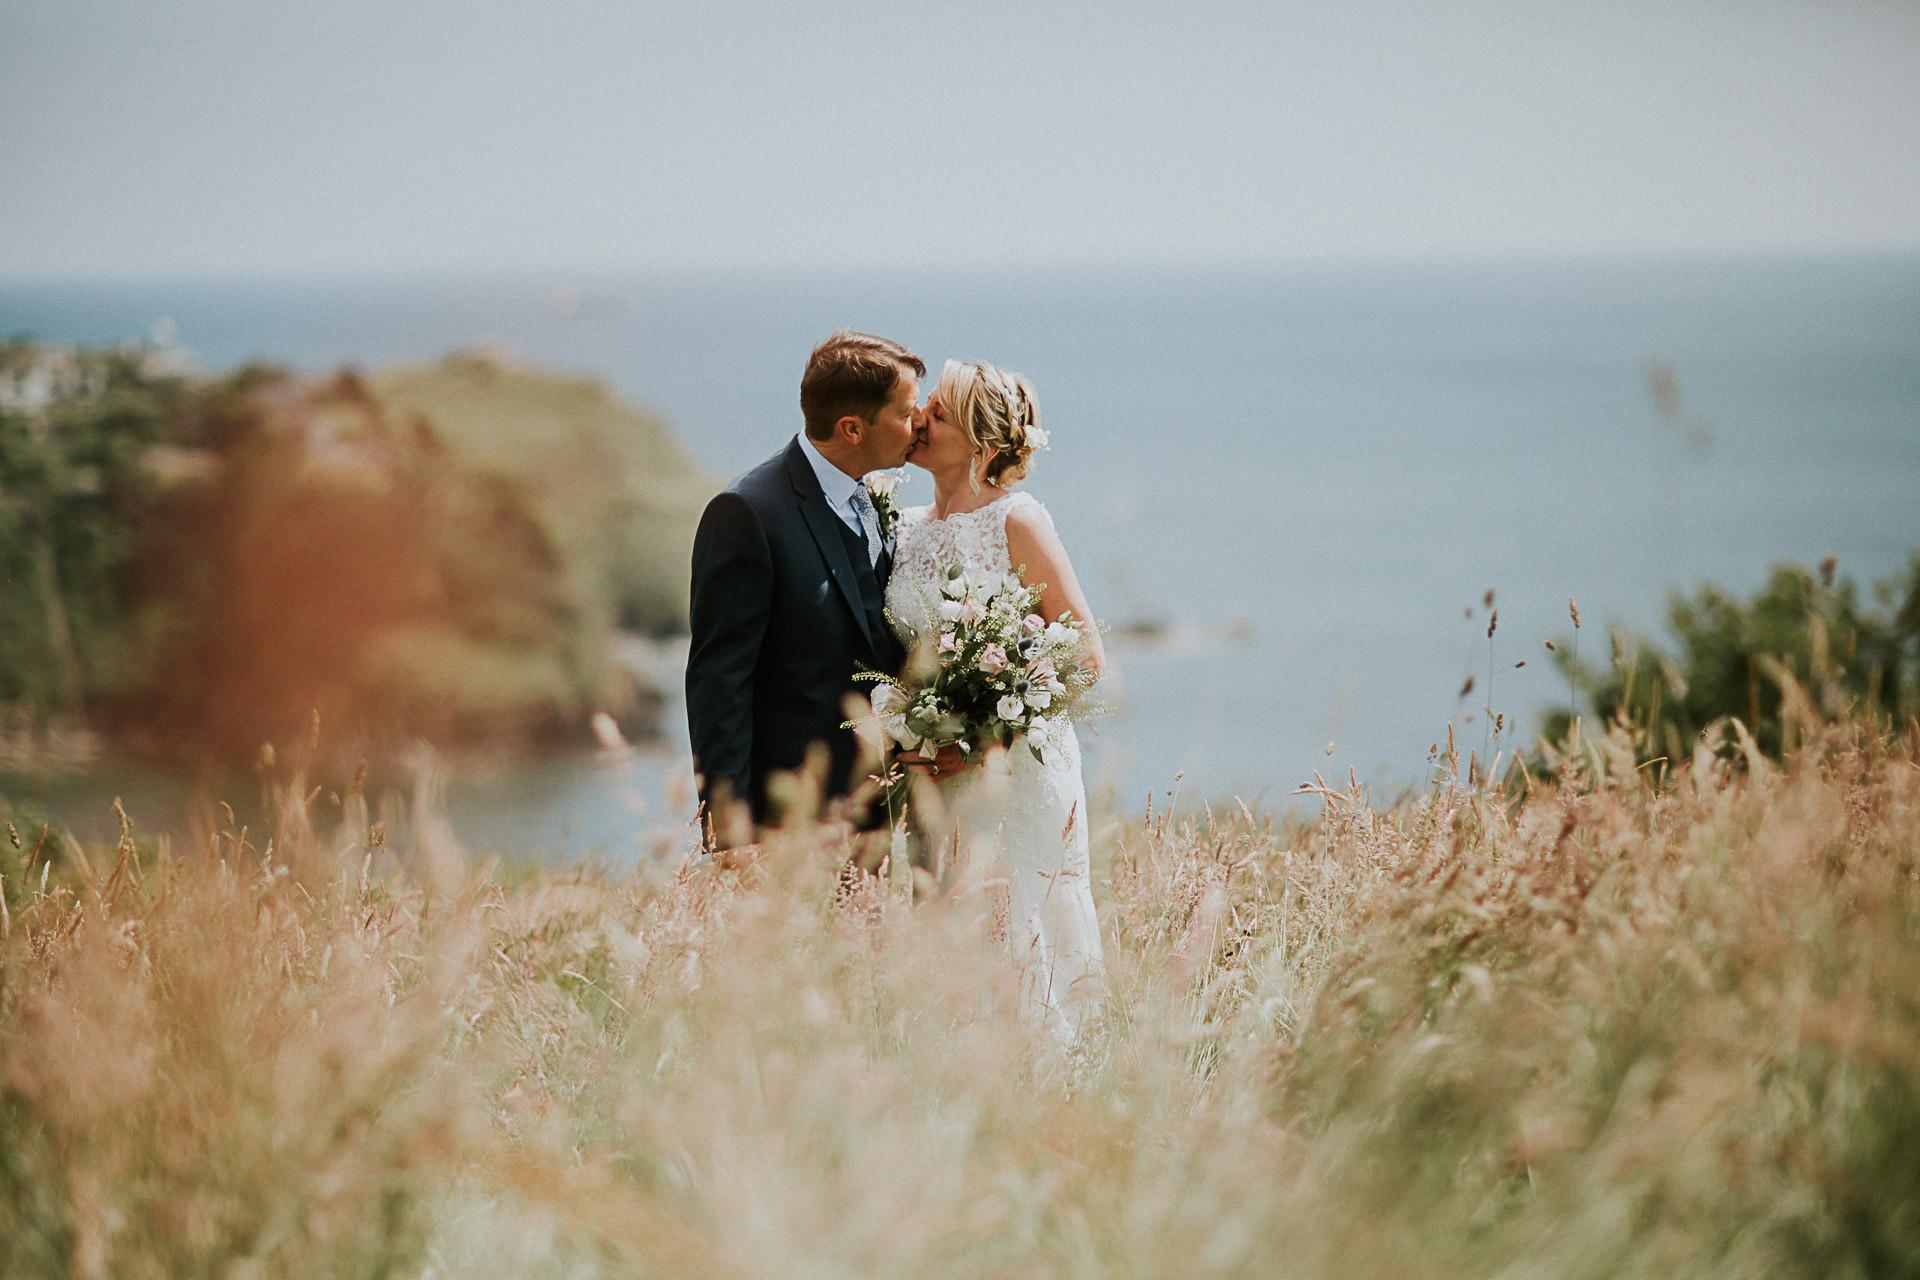 Wedding Photographer in Cornwall shooting at Knightor Winery - St Austell